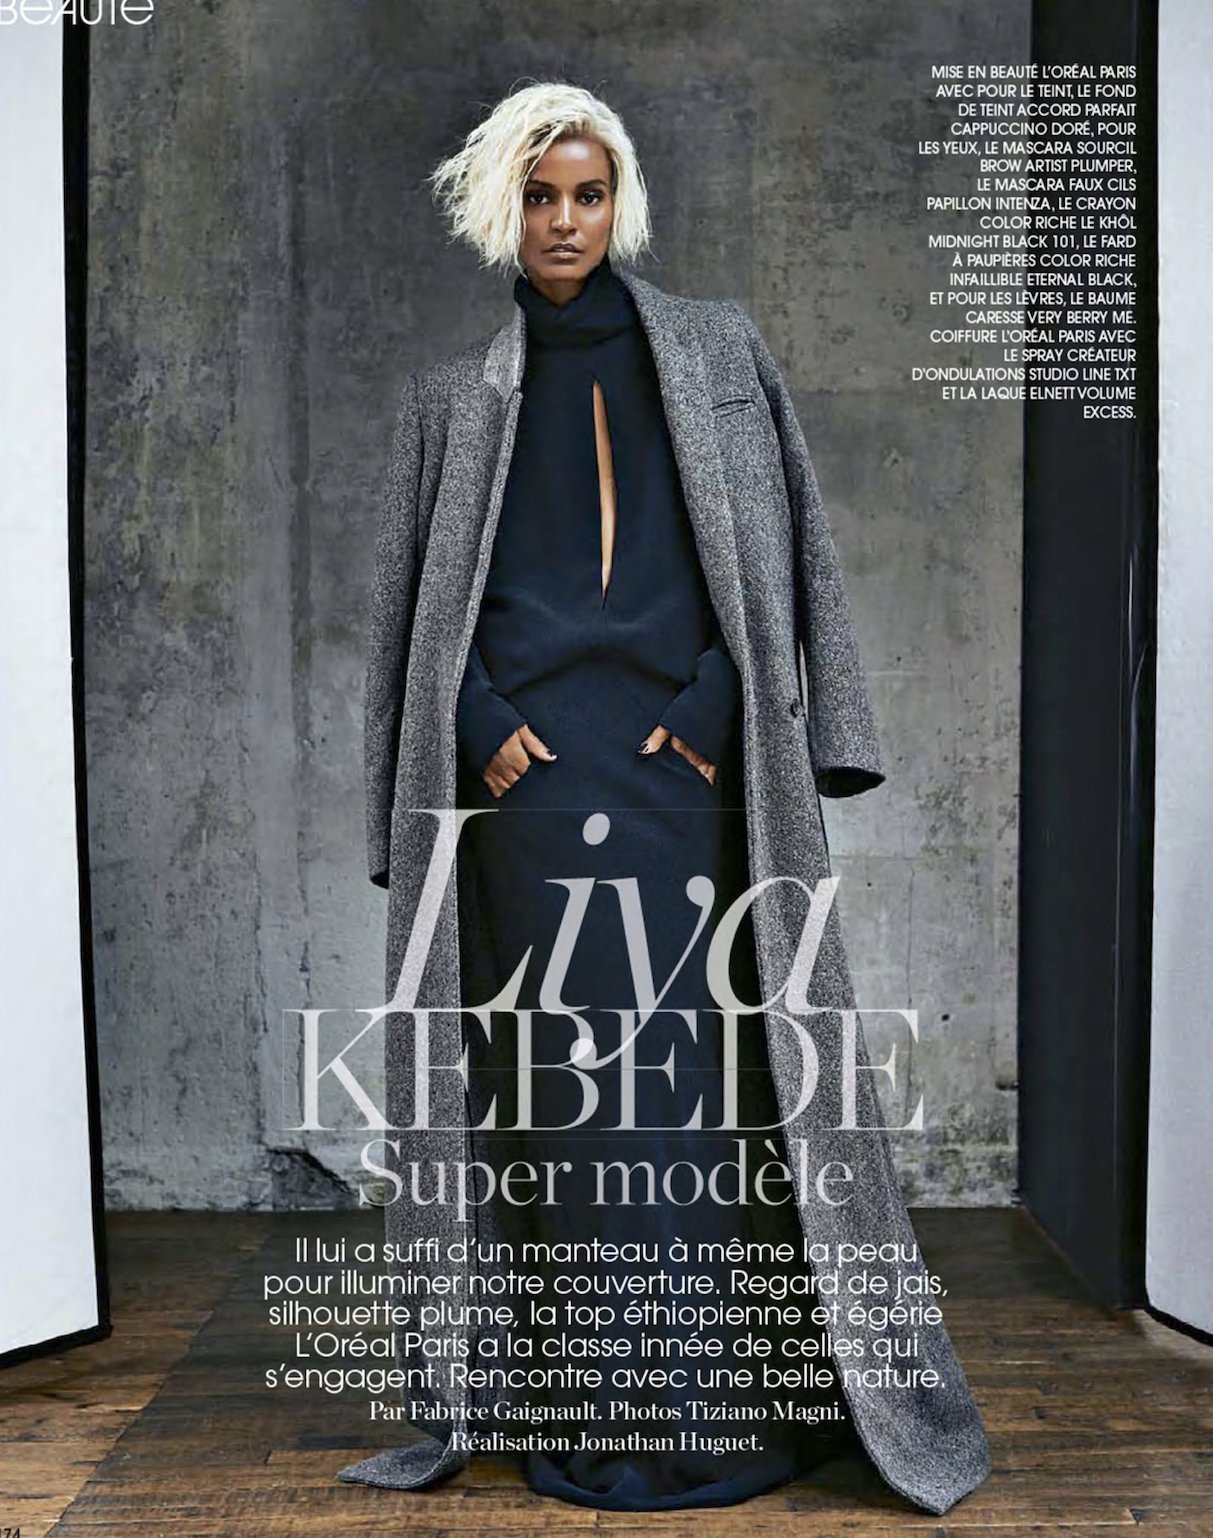 Liya-Kebede-by-Tziano-Magni-for-Marie-Claire-France-00012.jpeg